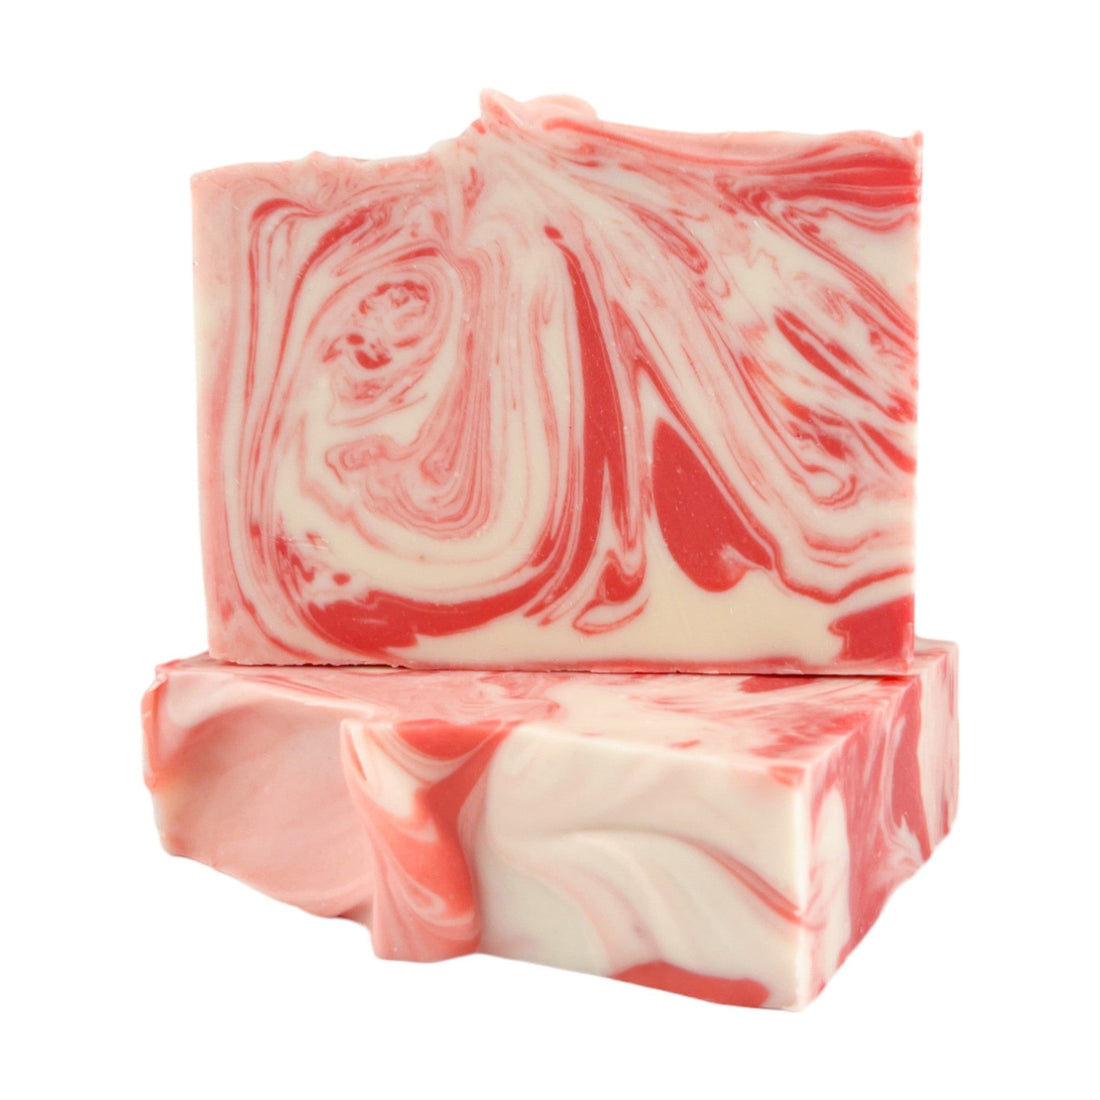 Peppermint  -Bar Soap - Old Town Soap Co.